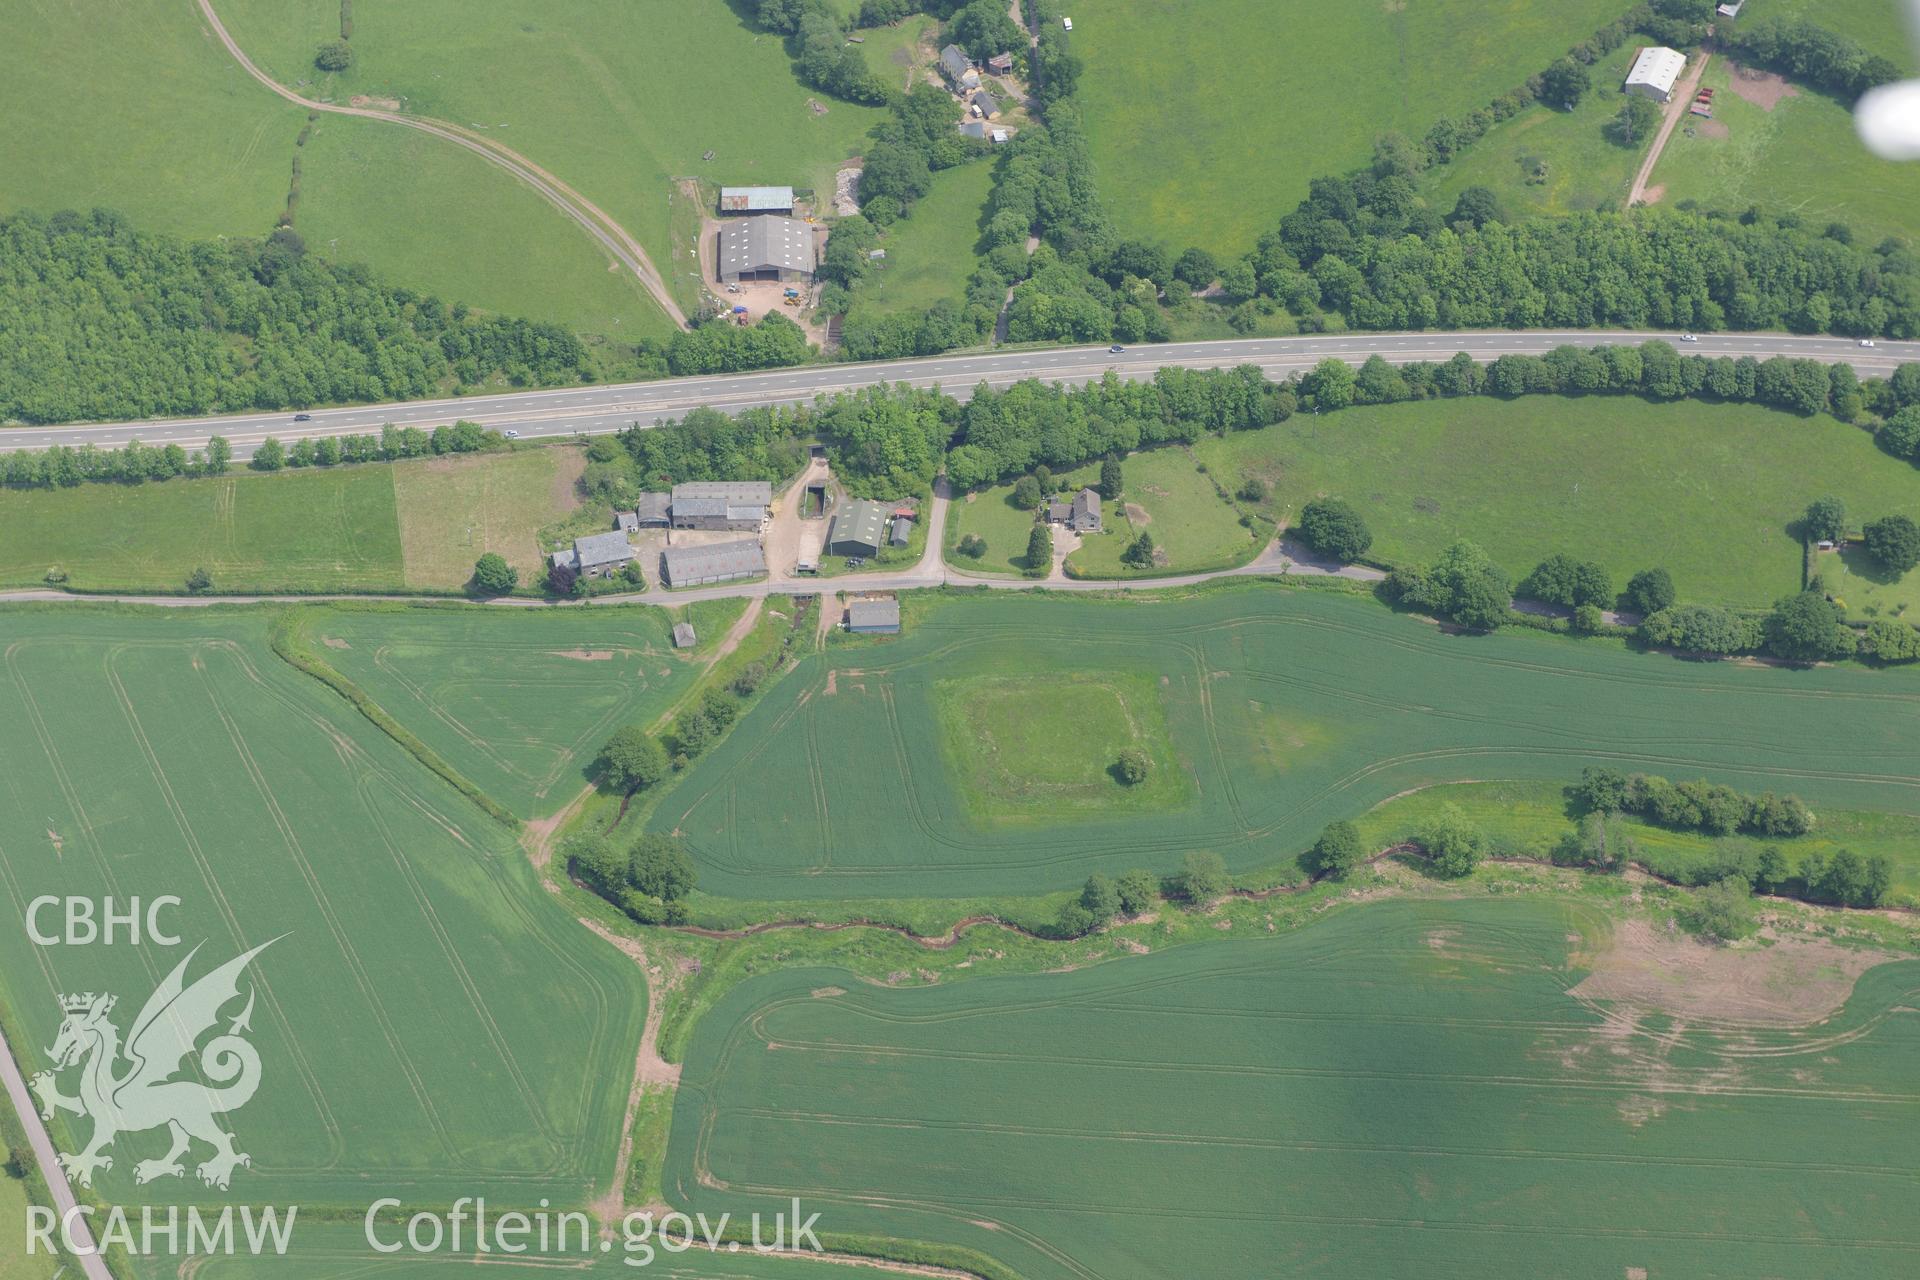 Whitehall farmhouse, farm buildings and moat, Llantristant Fawr. Oblique aerial photograph taken during the Royal Commission's programme of archaeological aerial reconnaissance by Toby Driver on 11th June 2015.